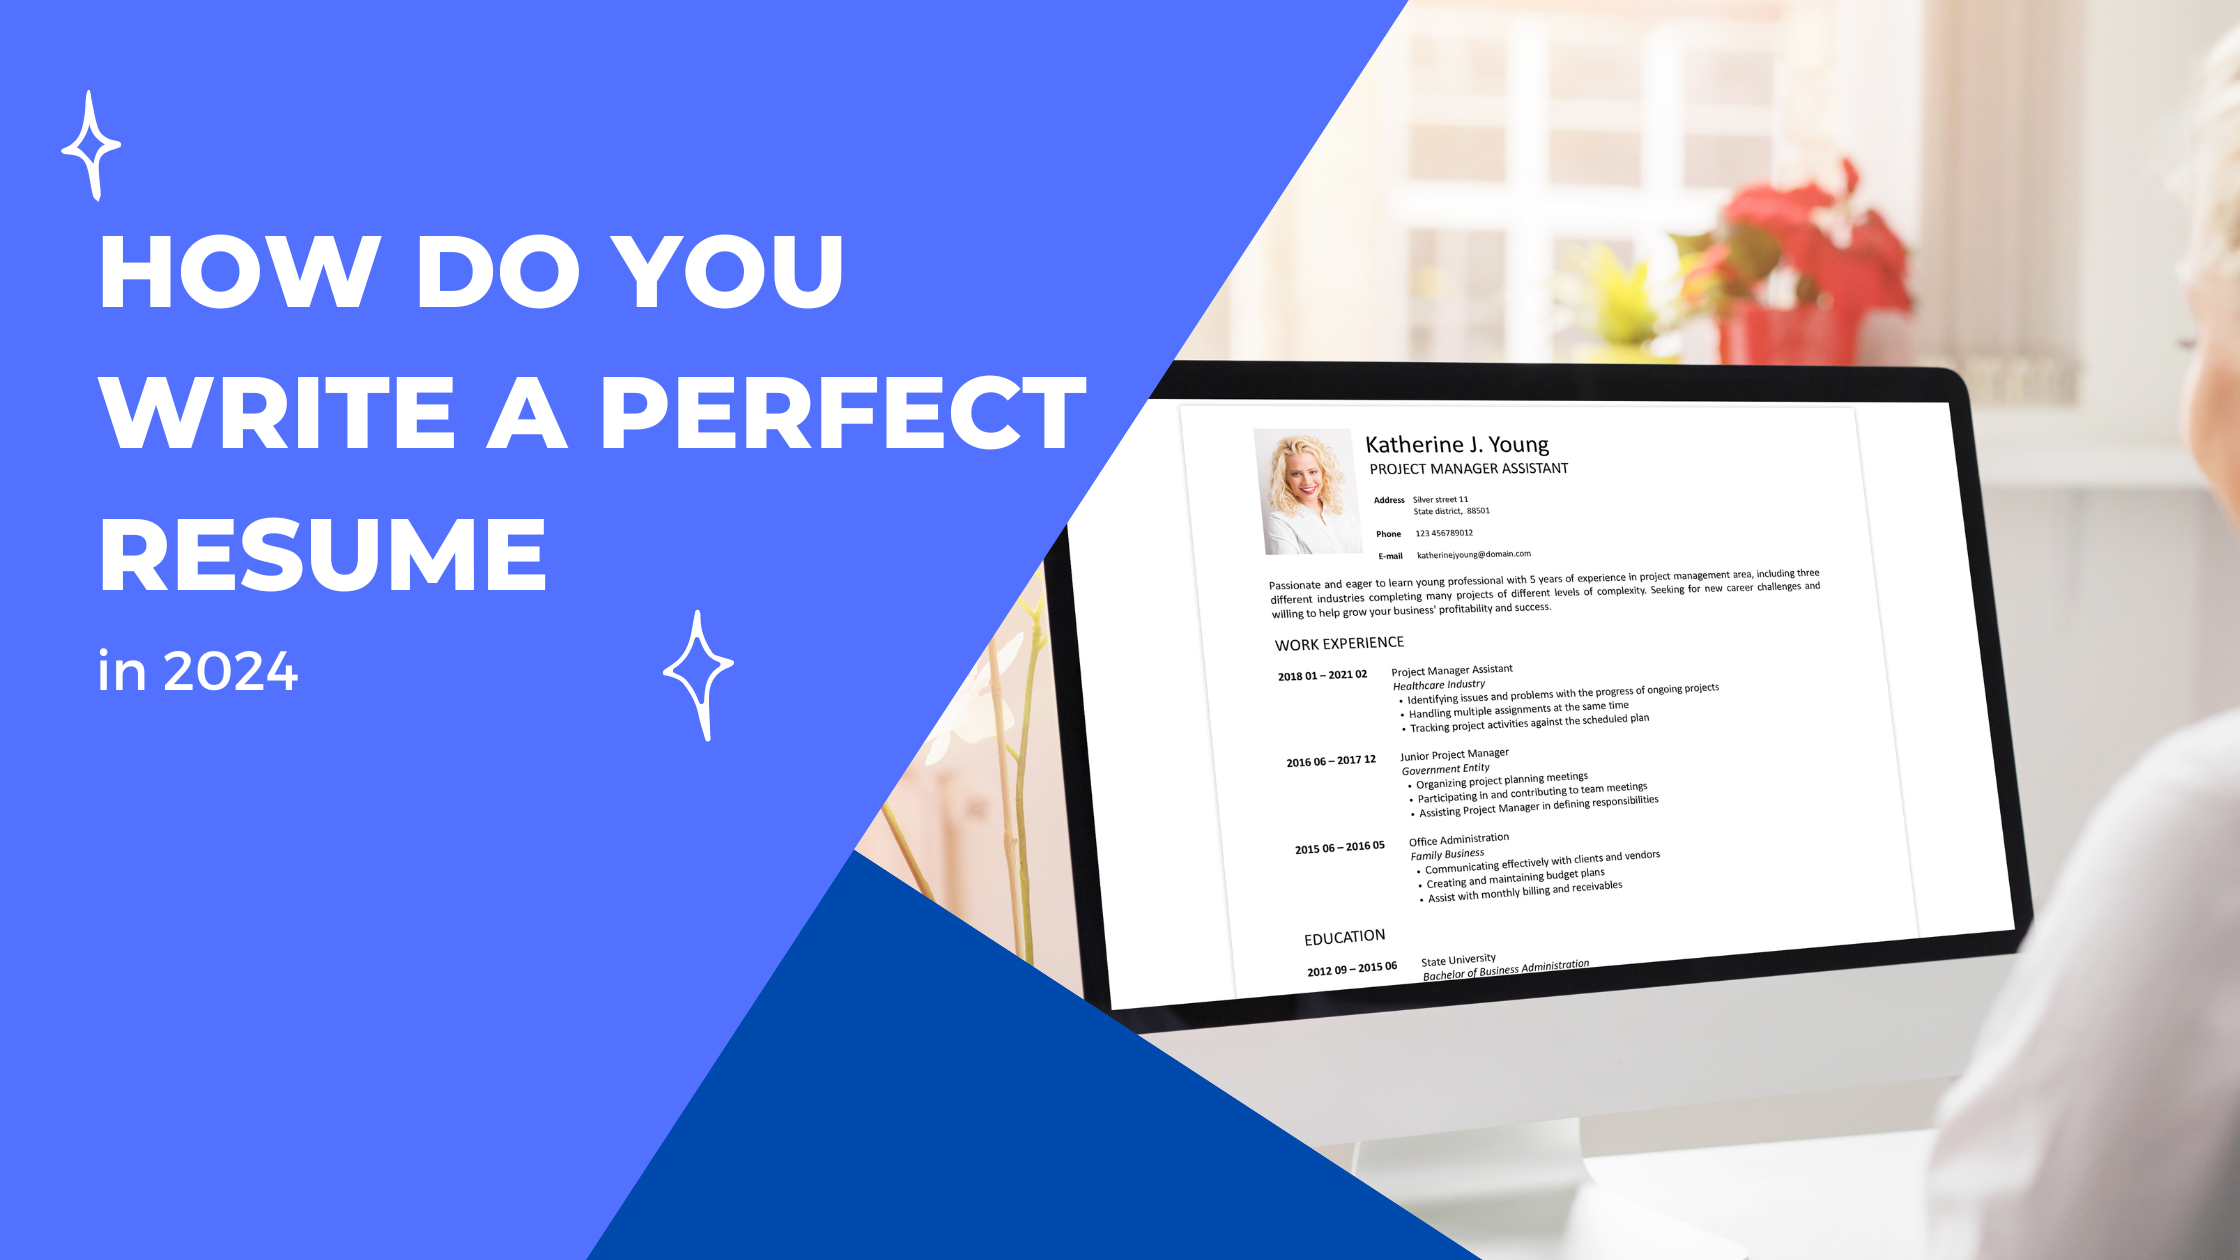 write a perfect resume in 2024